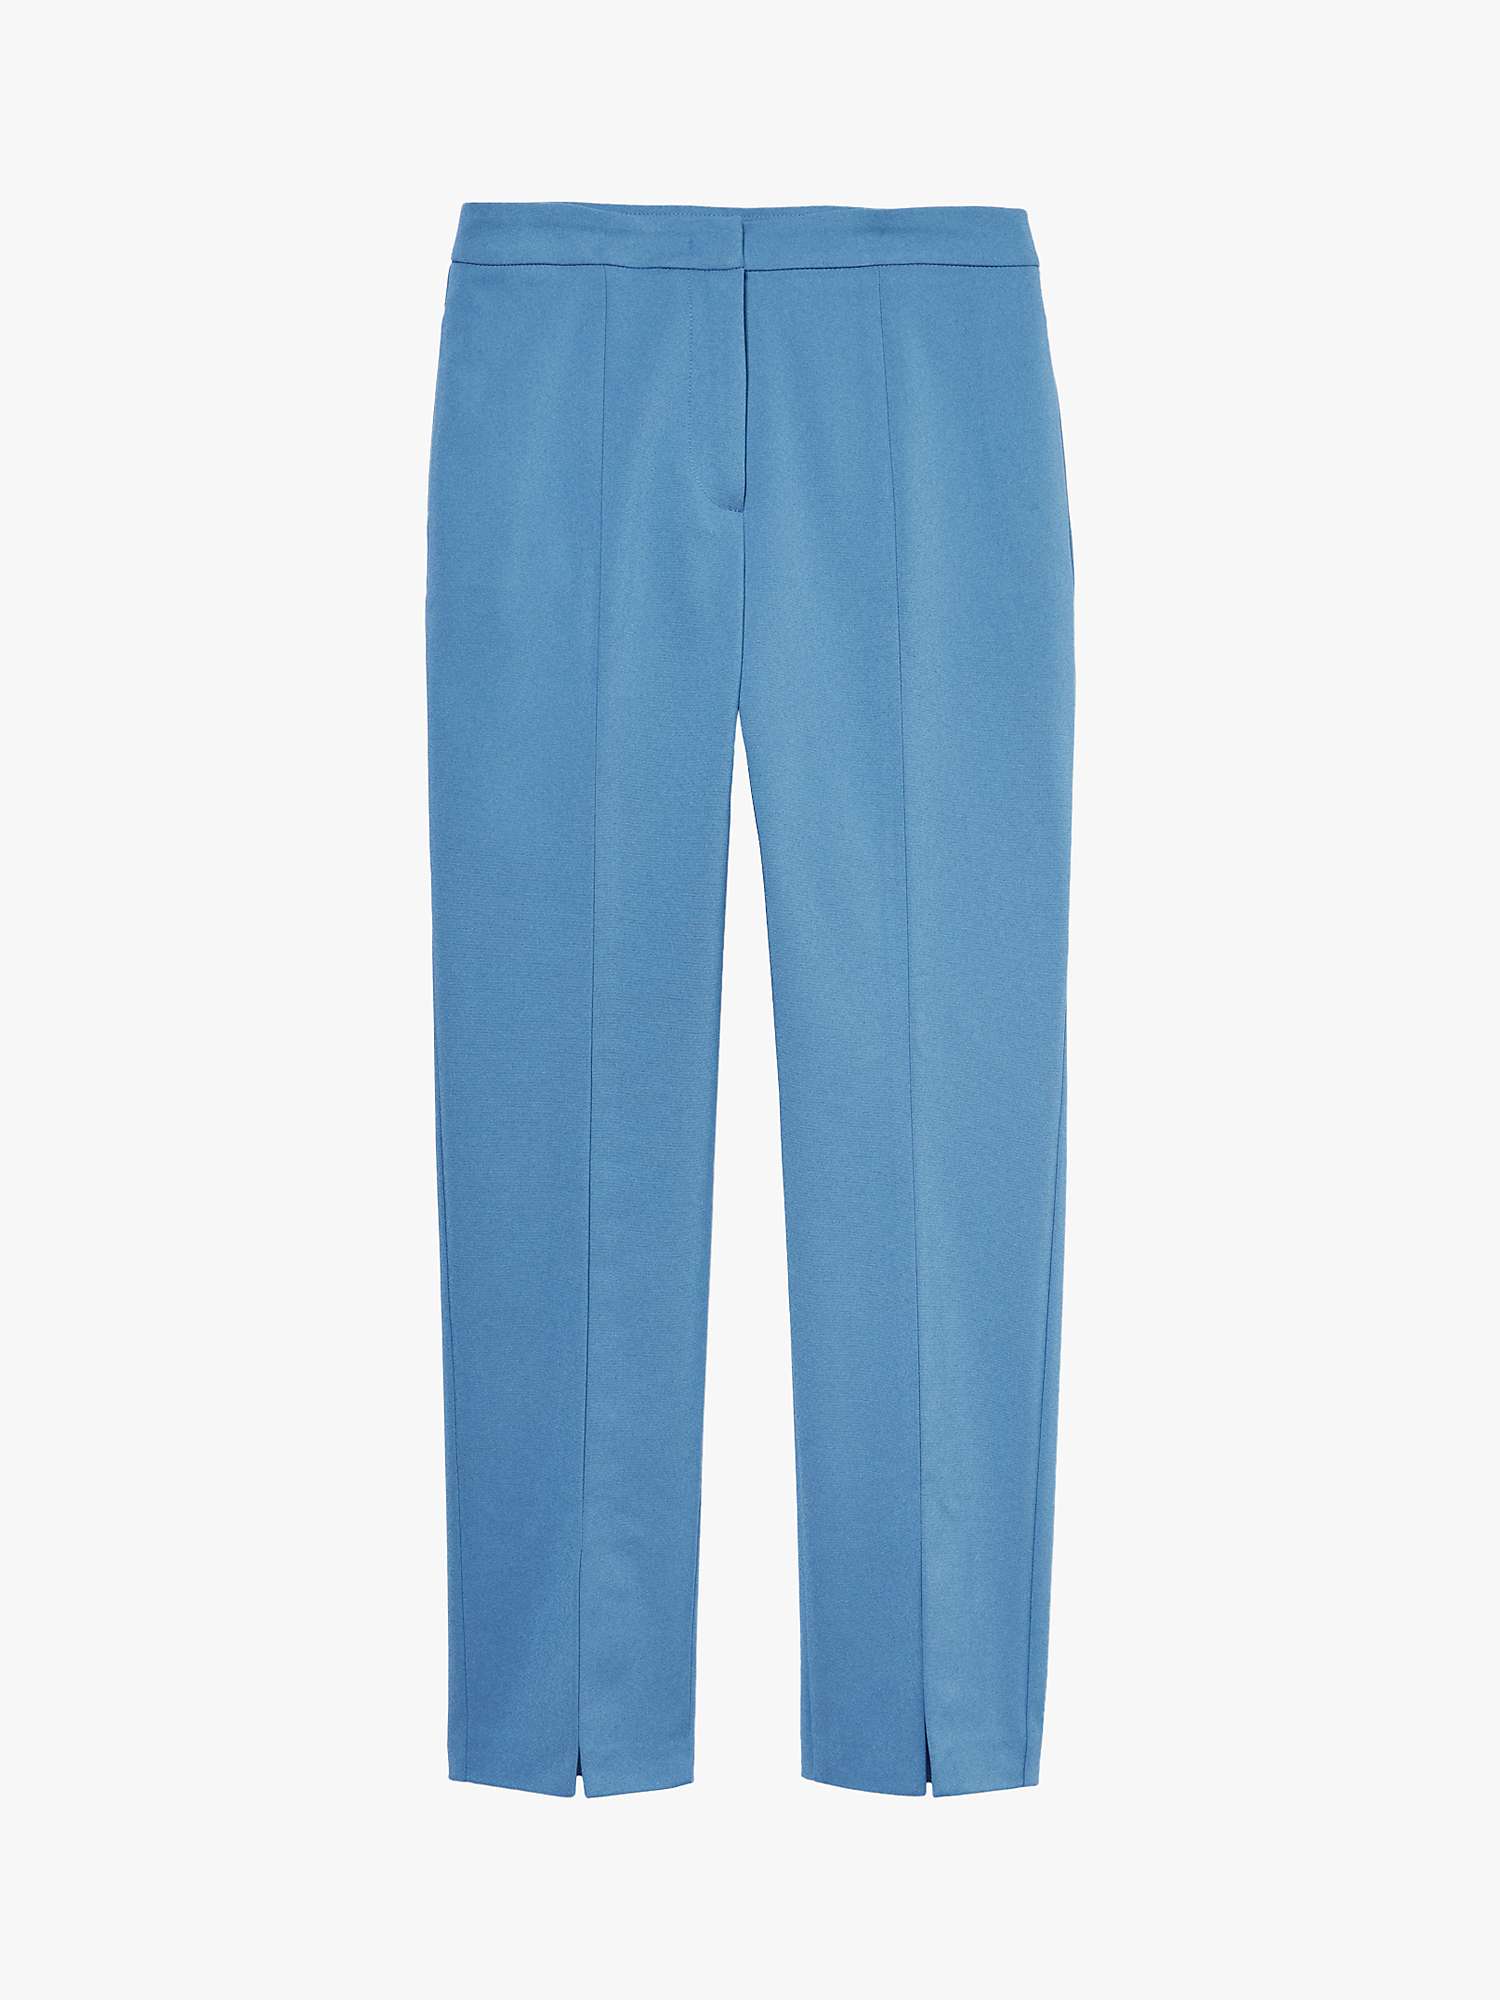 Buy Sisley Stretch Cotton Cigarette Trousers Online at johnlewis.com